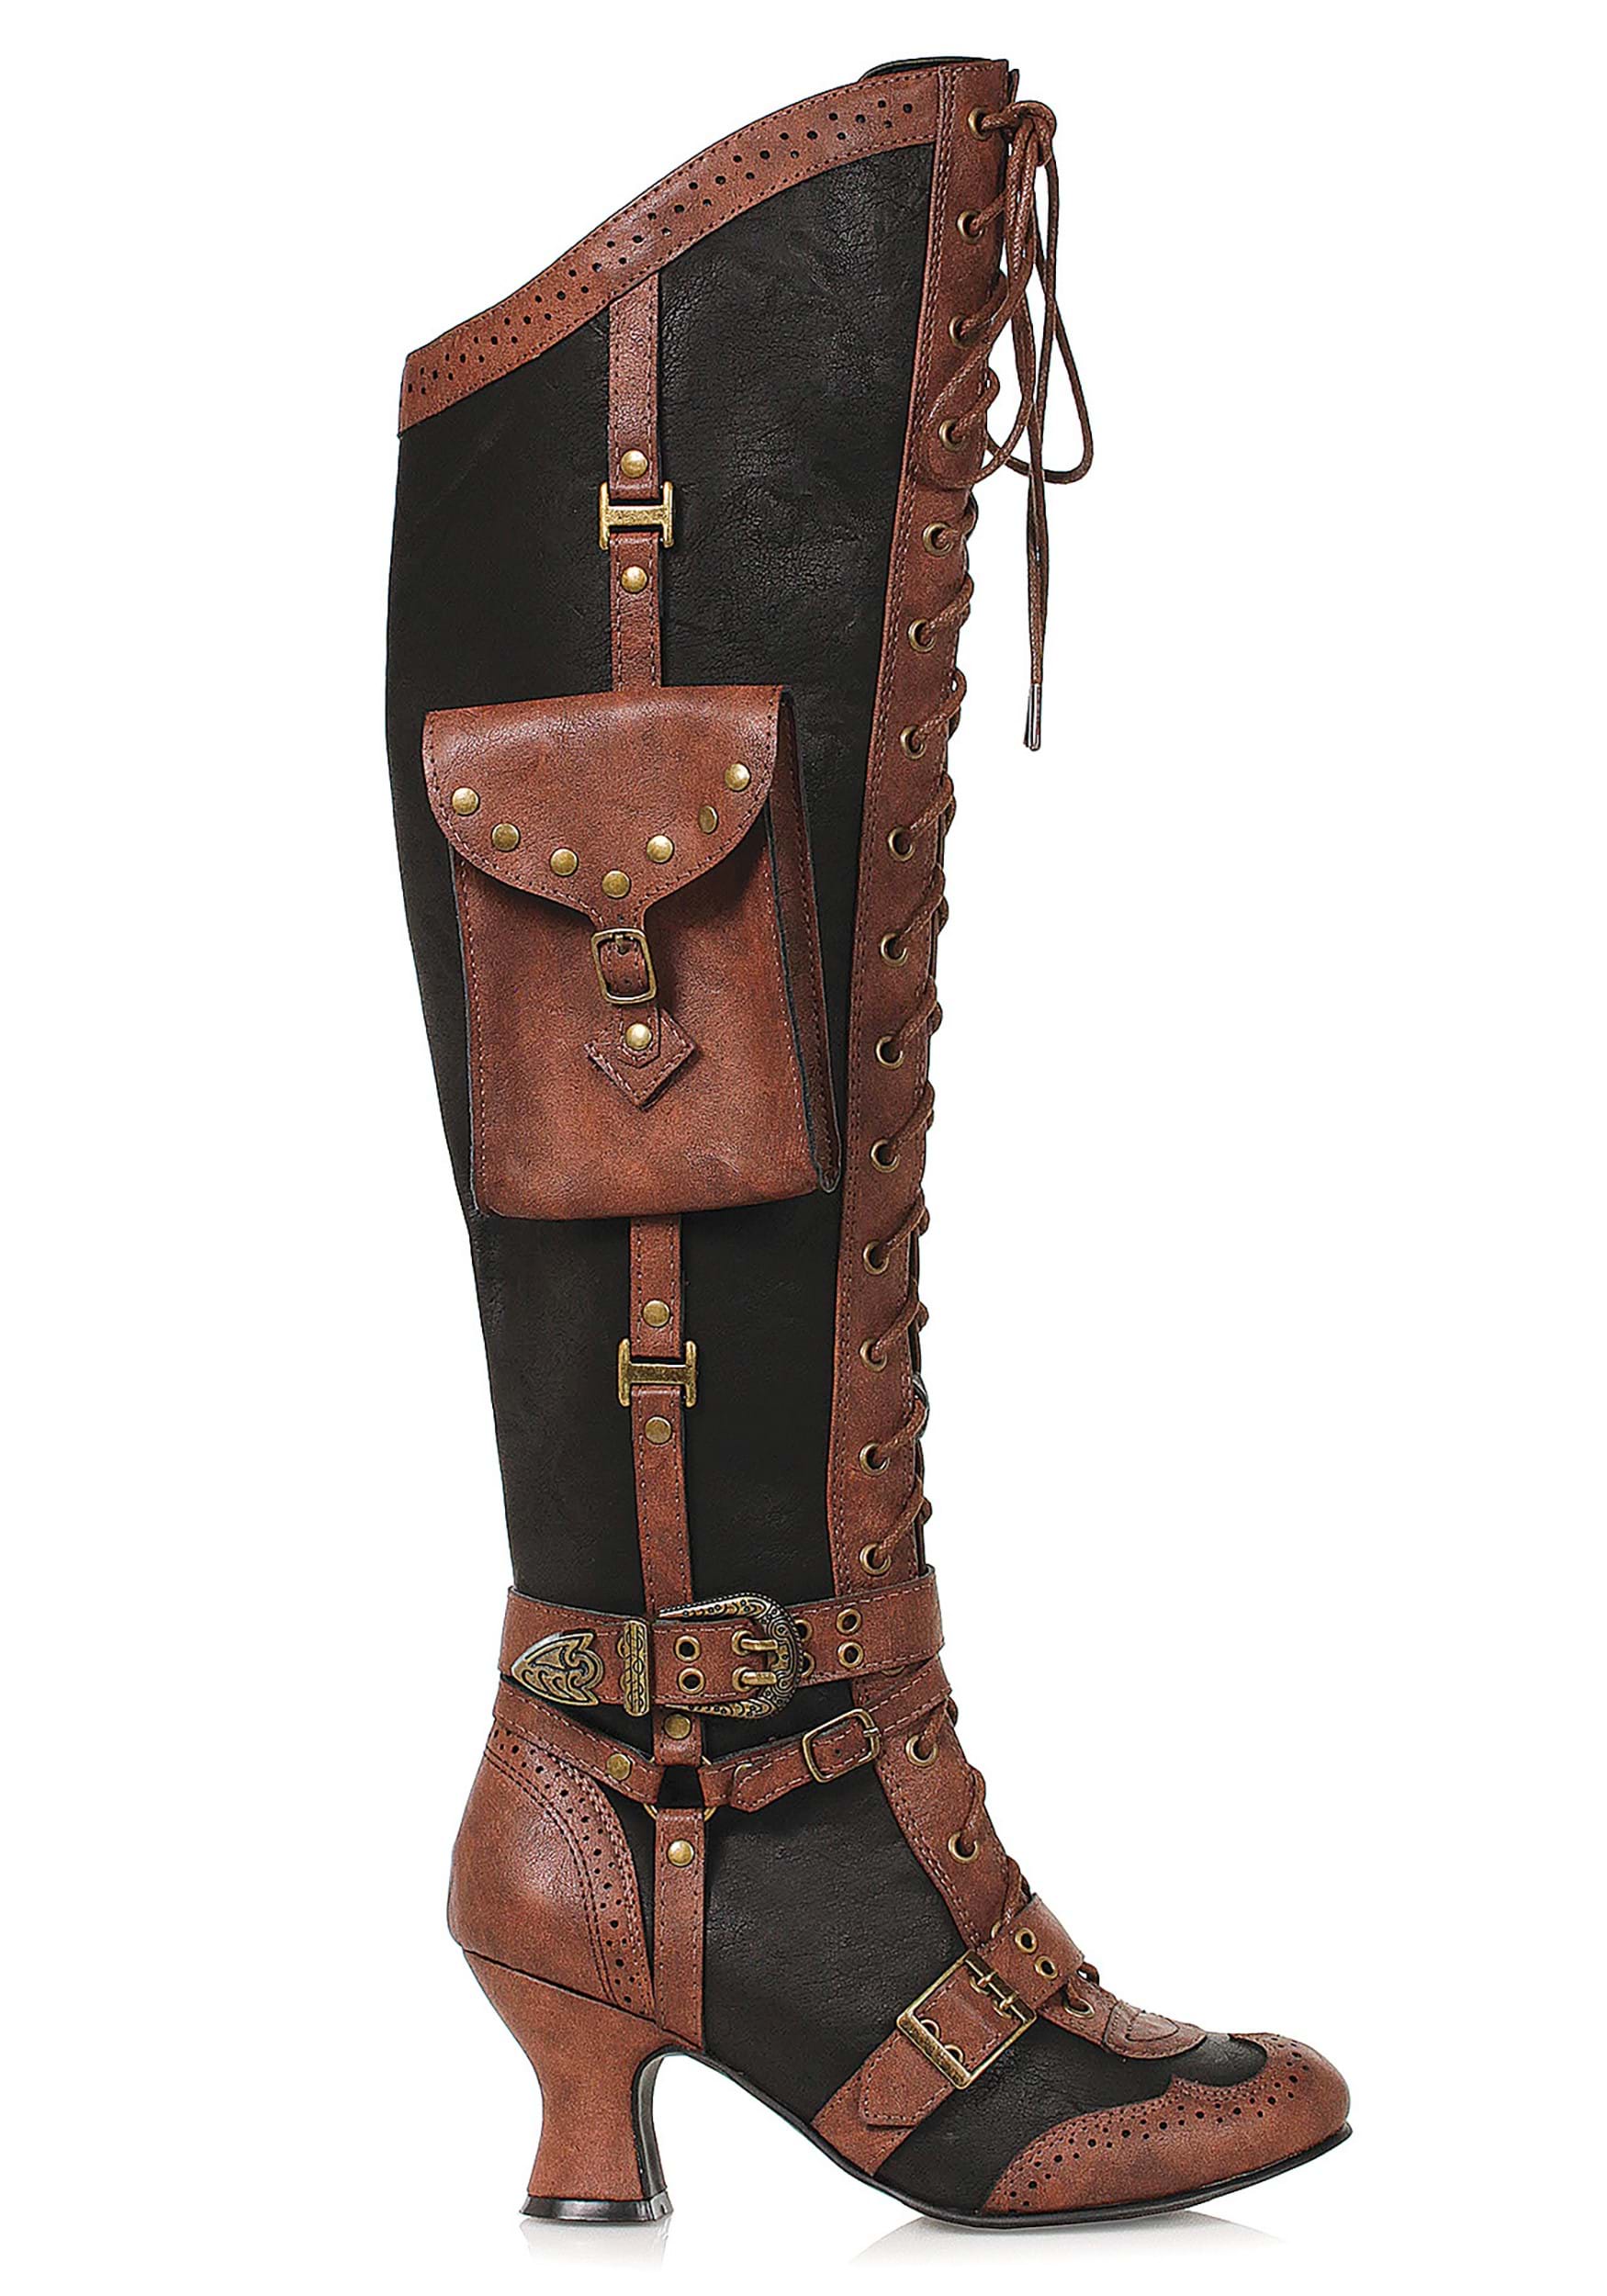 Image of Lace Up Steampunk Heeled Boots ID EE254INGRIDBR-10